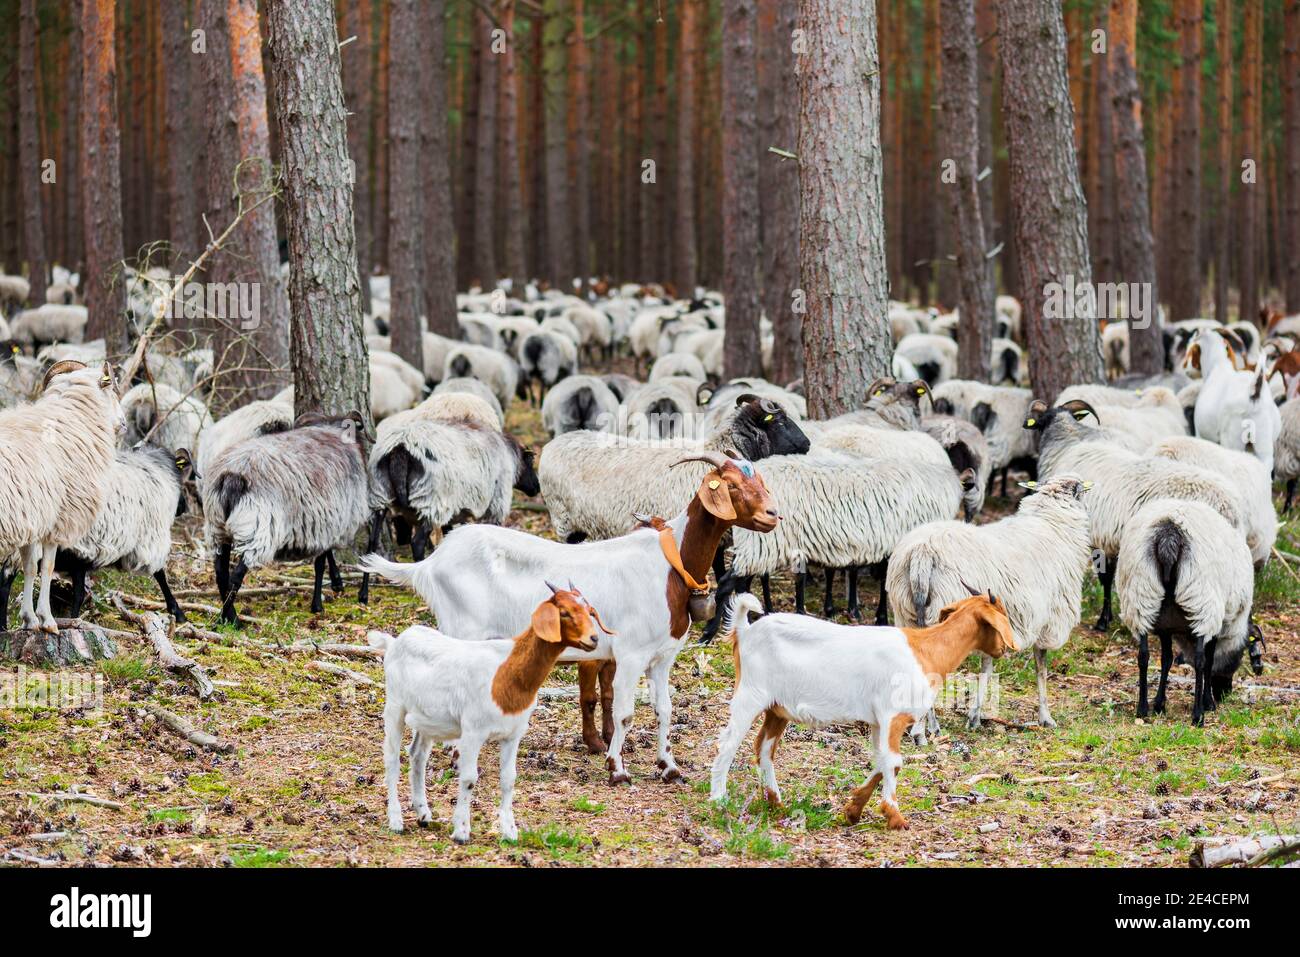 Goats and sheep in the Nemitzer Heide as landscape gardeners run through the pine trees Stock Photo